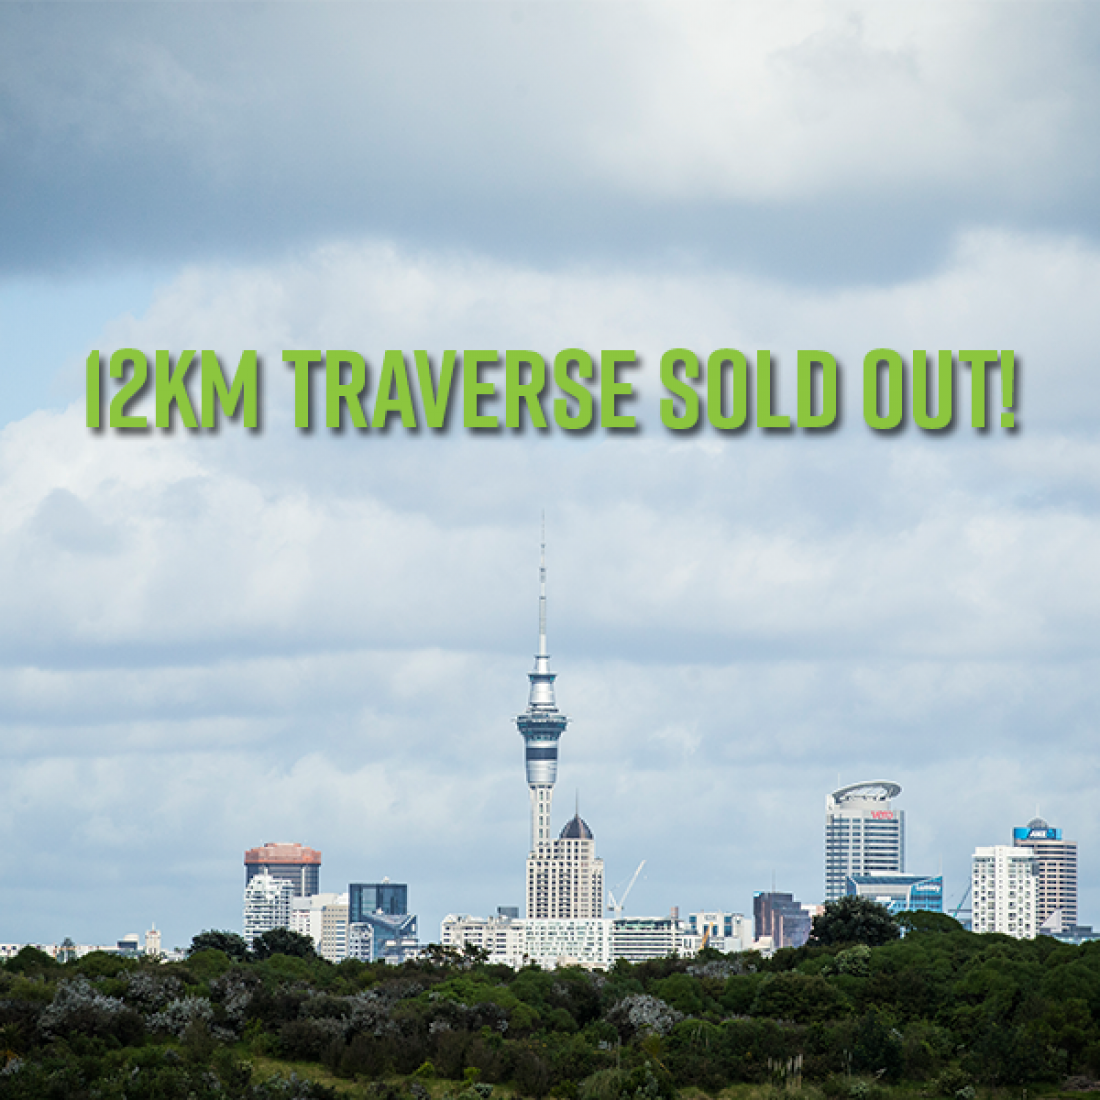 12KM TRAVERSE SOLD OUT